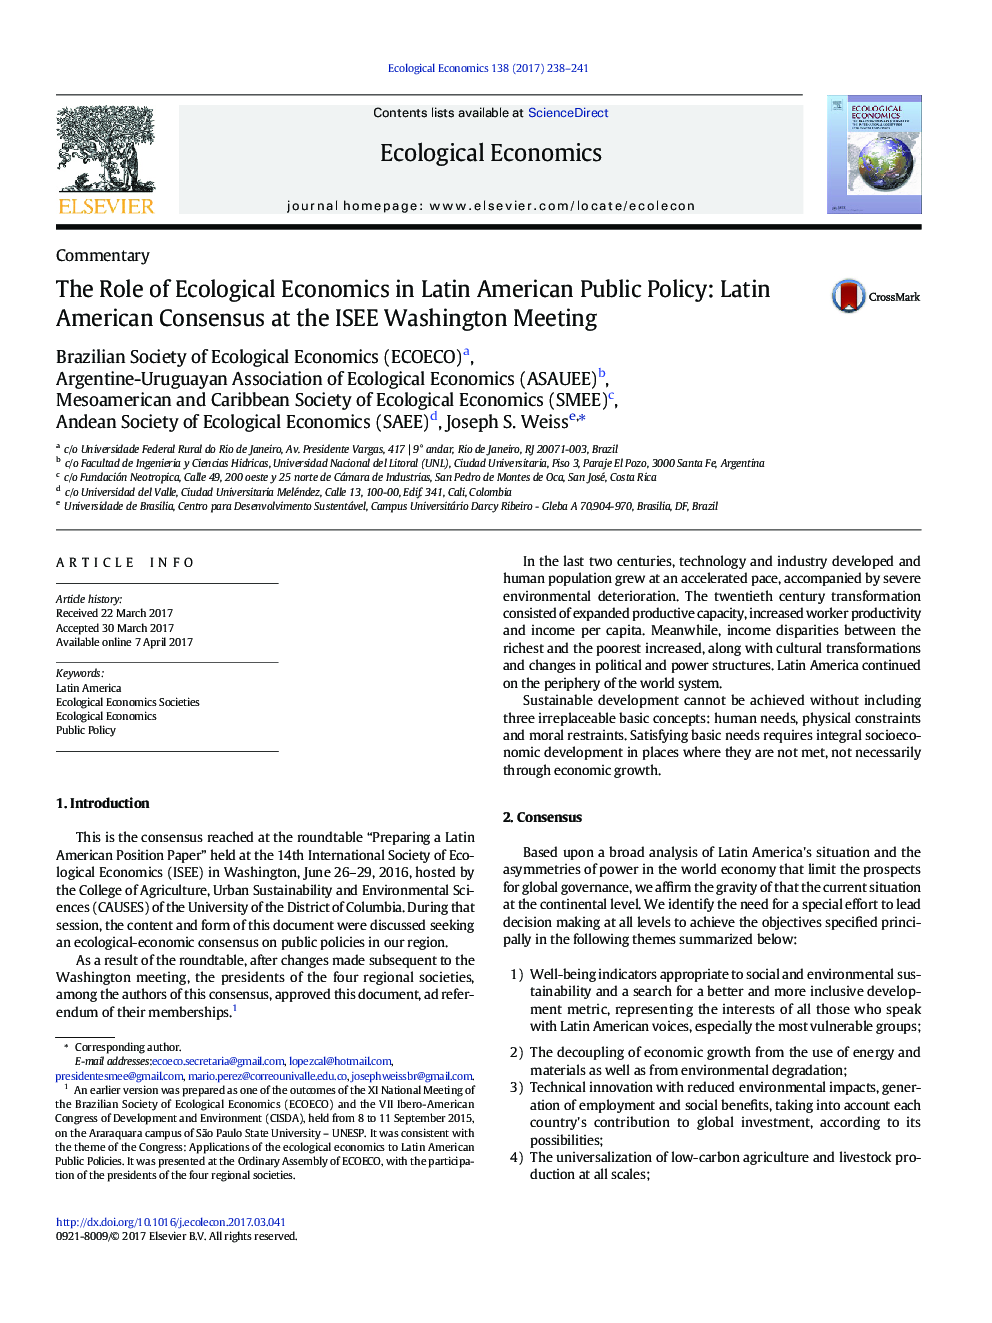 The Role of Ecological Economics in Latin American Public Policy: Latin American Consensus at the ISEE Washington Meeting